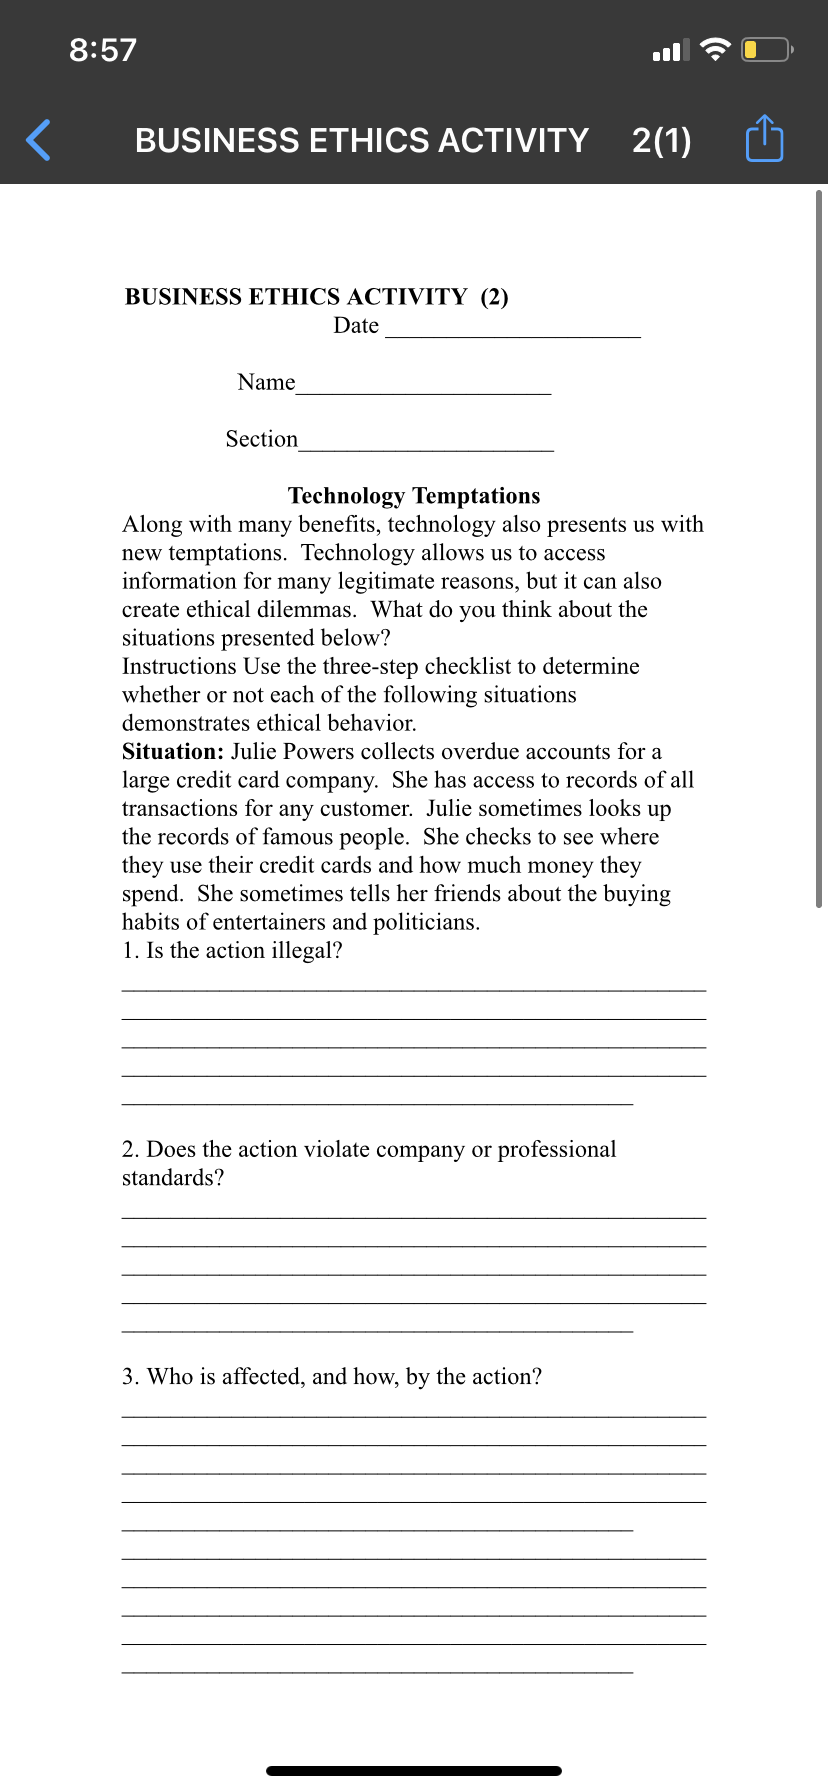 8:57
BUSINESS ETHICS ACTIVITY 2(1)
BUSINESS ETHICS ACTIVITY (2)
Date
Name
Section
Technology Temptations
Along with many benefits, technology also presents us with
new temptations. Technology allows us to access
information for many legitimate reasons, but it can also
create ethical dilemmas. What do you think about the
situations presented below?
Instructions Use the three-step checklist to determine
whether or not each of the following situations
demonstrates ethical behavior.
Situation: Julie Powers collects overdue accounts for a
large credit card company. She has access to records of all
transactions for any customer. Julie sometimes looks up
the records of famous people. She checks to see where
they use their credit cards and how much money they
spend. She sometimes tells her friends about the buying
habits of entertainers and politicians.
1. Is the action illegal?
2. Does the action violate company or professional
standards?
3. Who is affected, and how, by the action?
